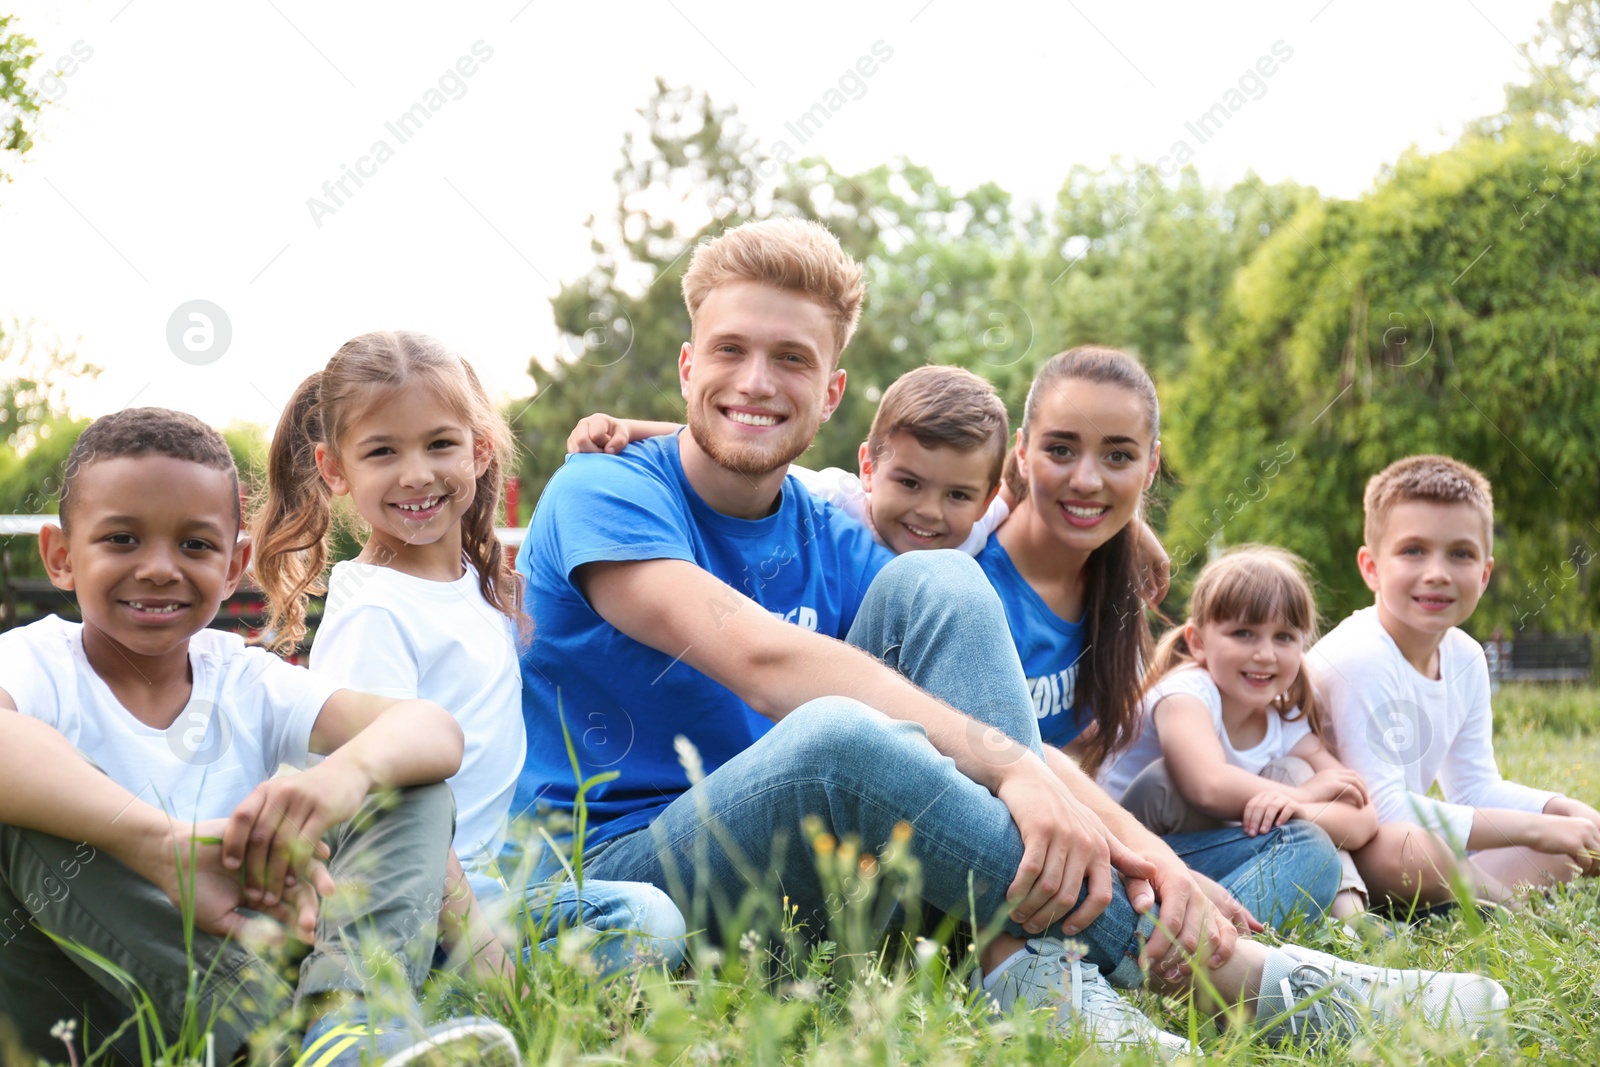 Photo of Volunteers and kids sitting on grass in park